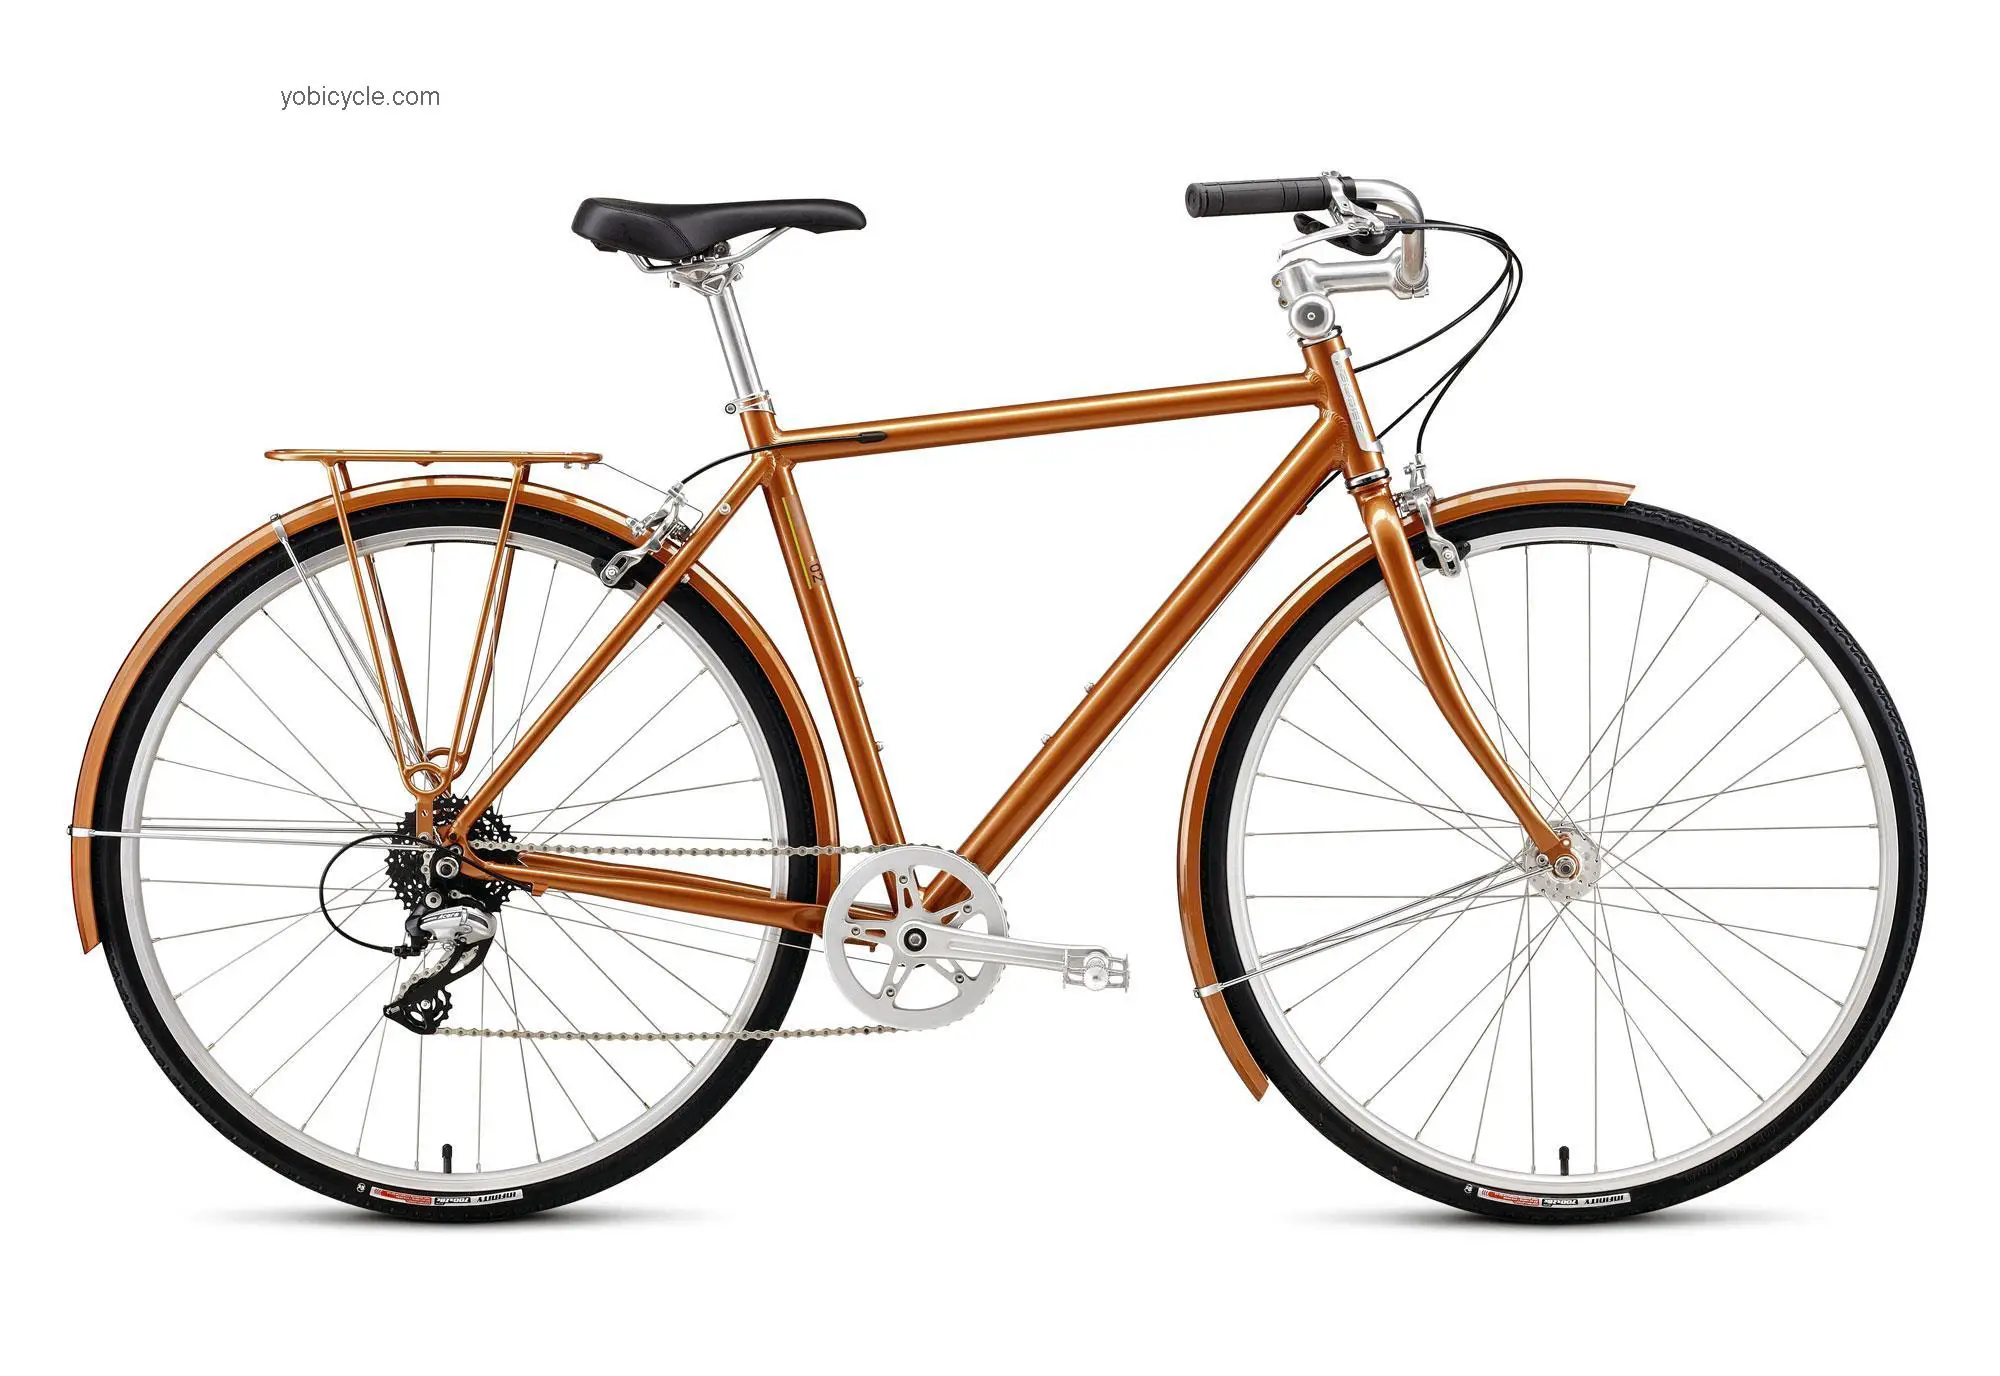 Specialized Daily 2 2012 comparison online with competitors